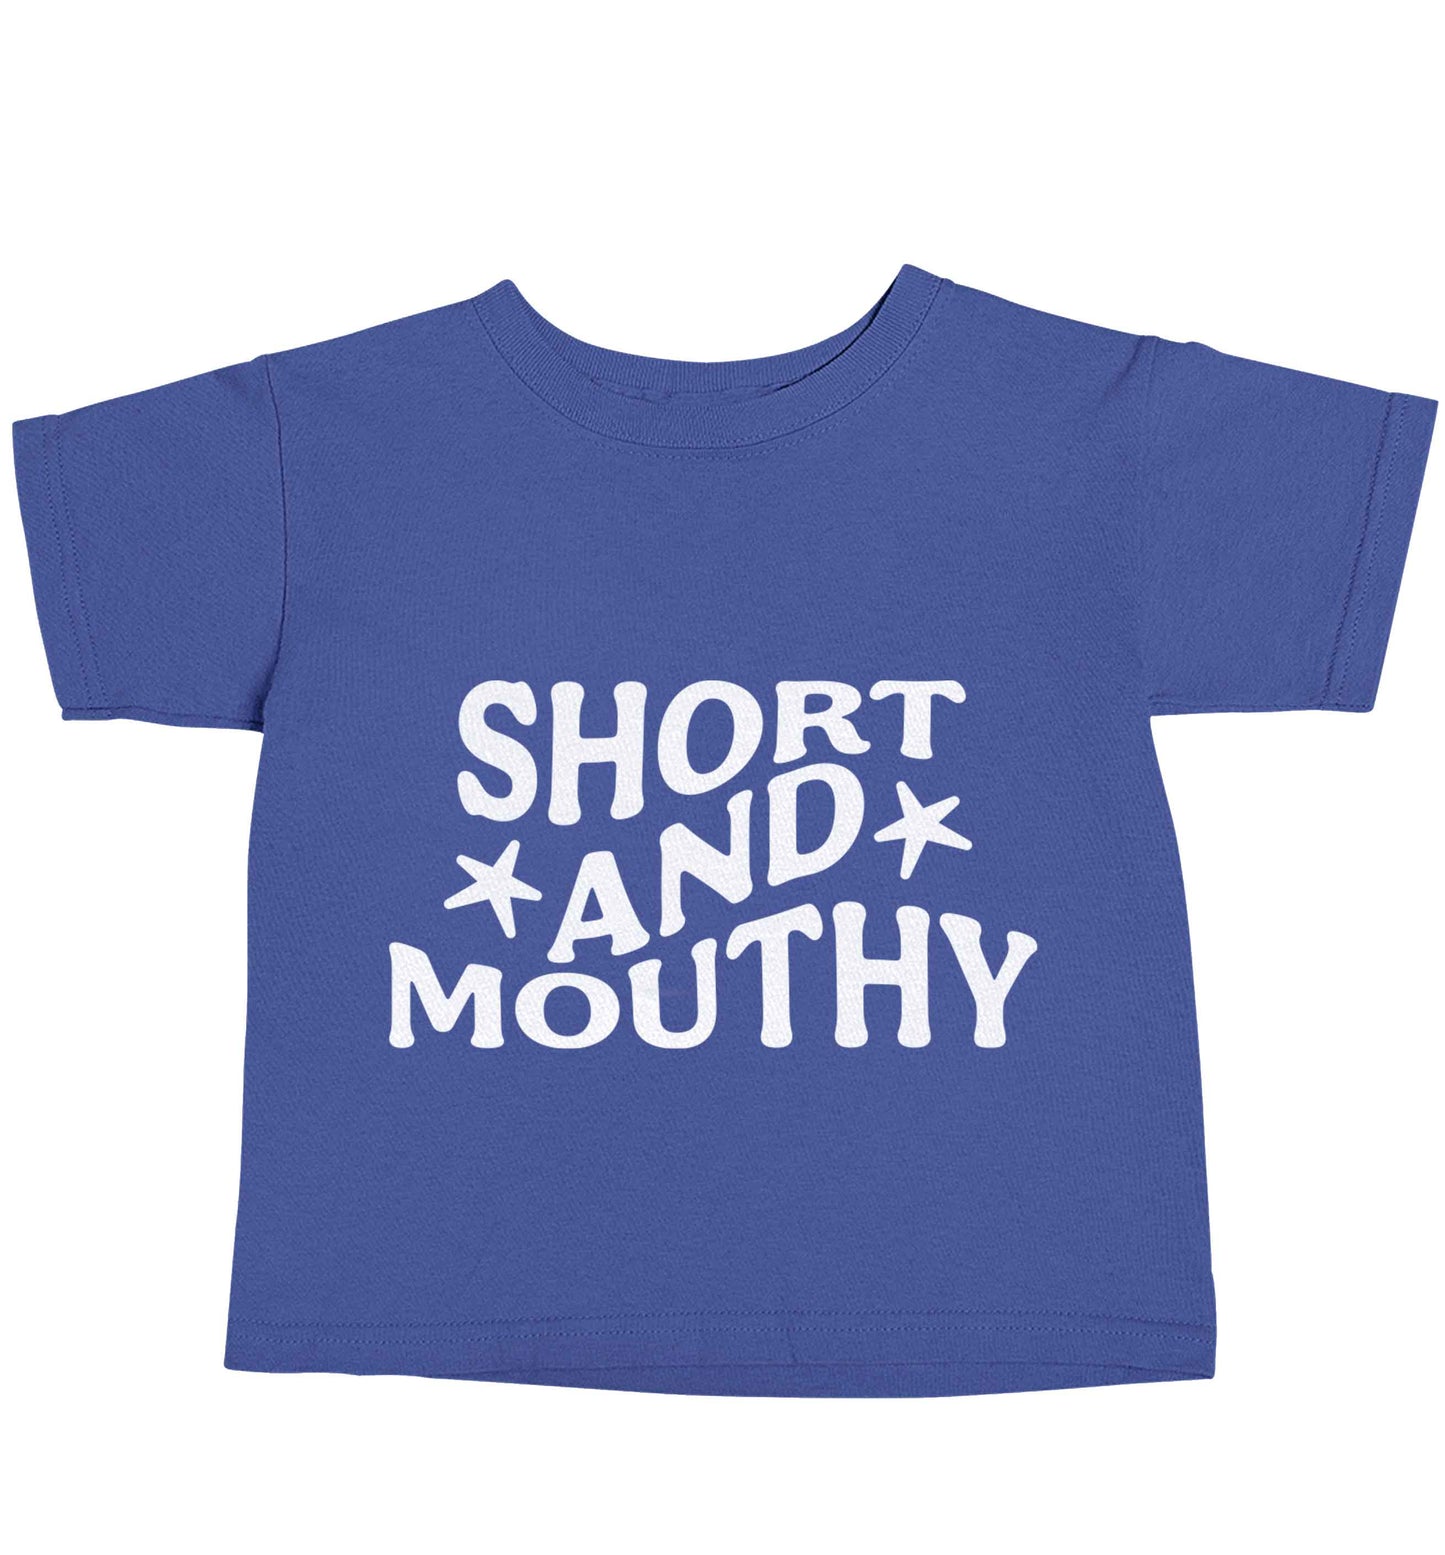 Short and mouthy blue baby toddler Tshirt 2 Years